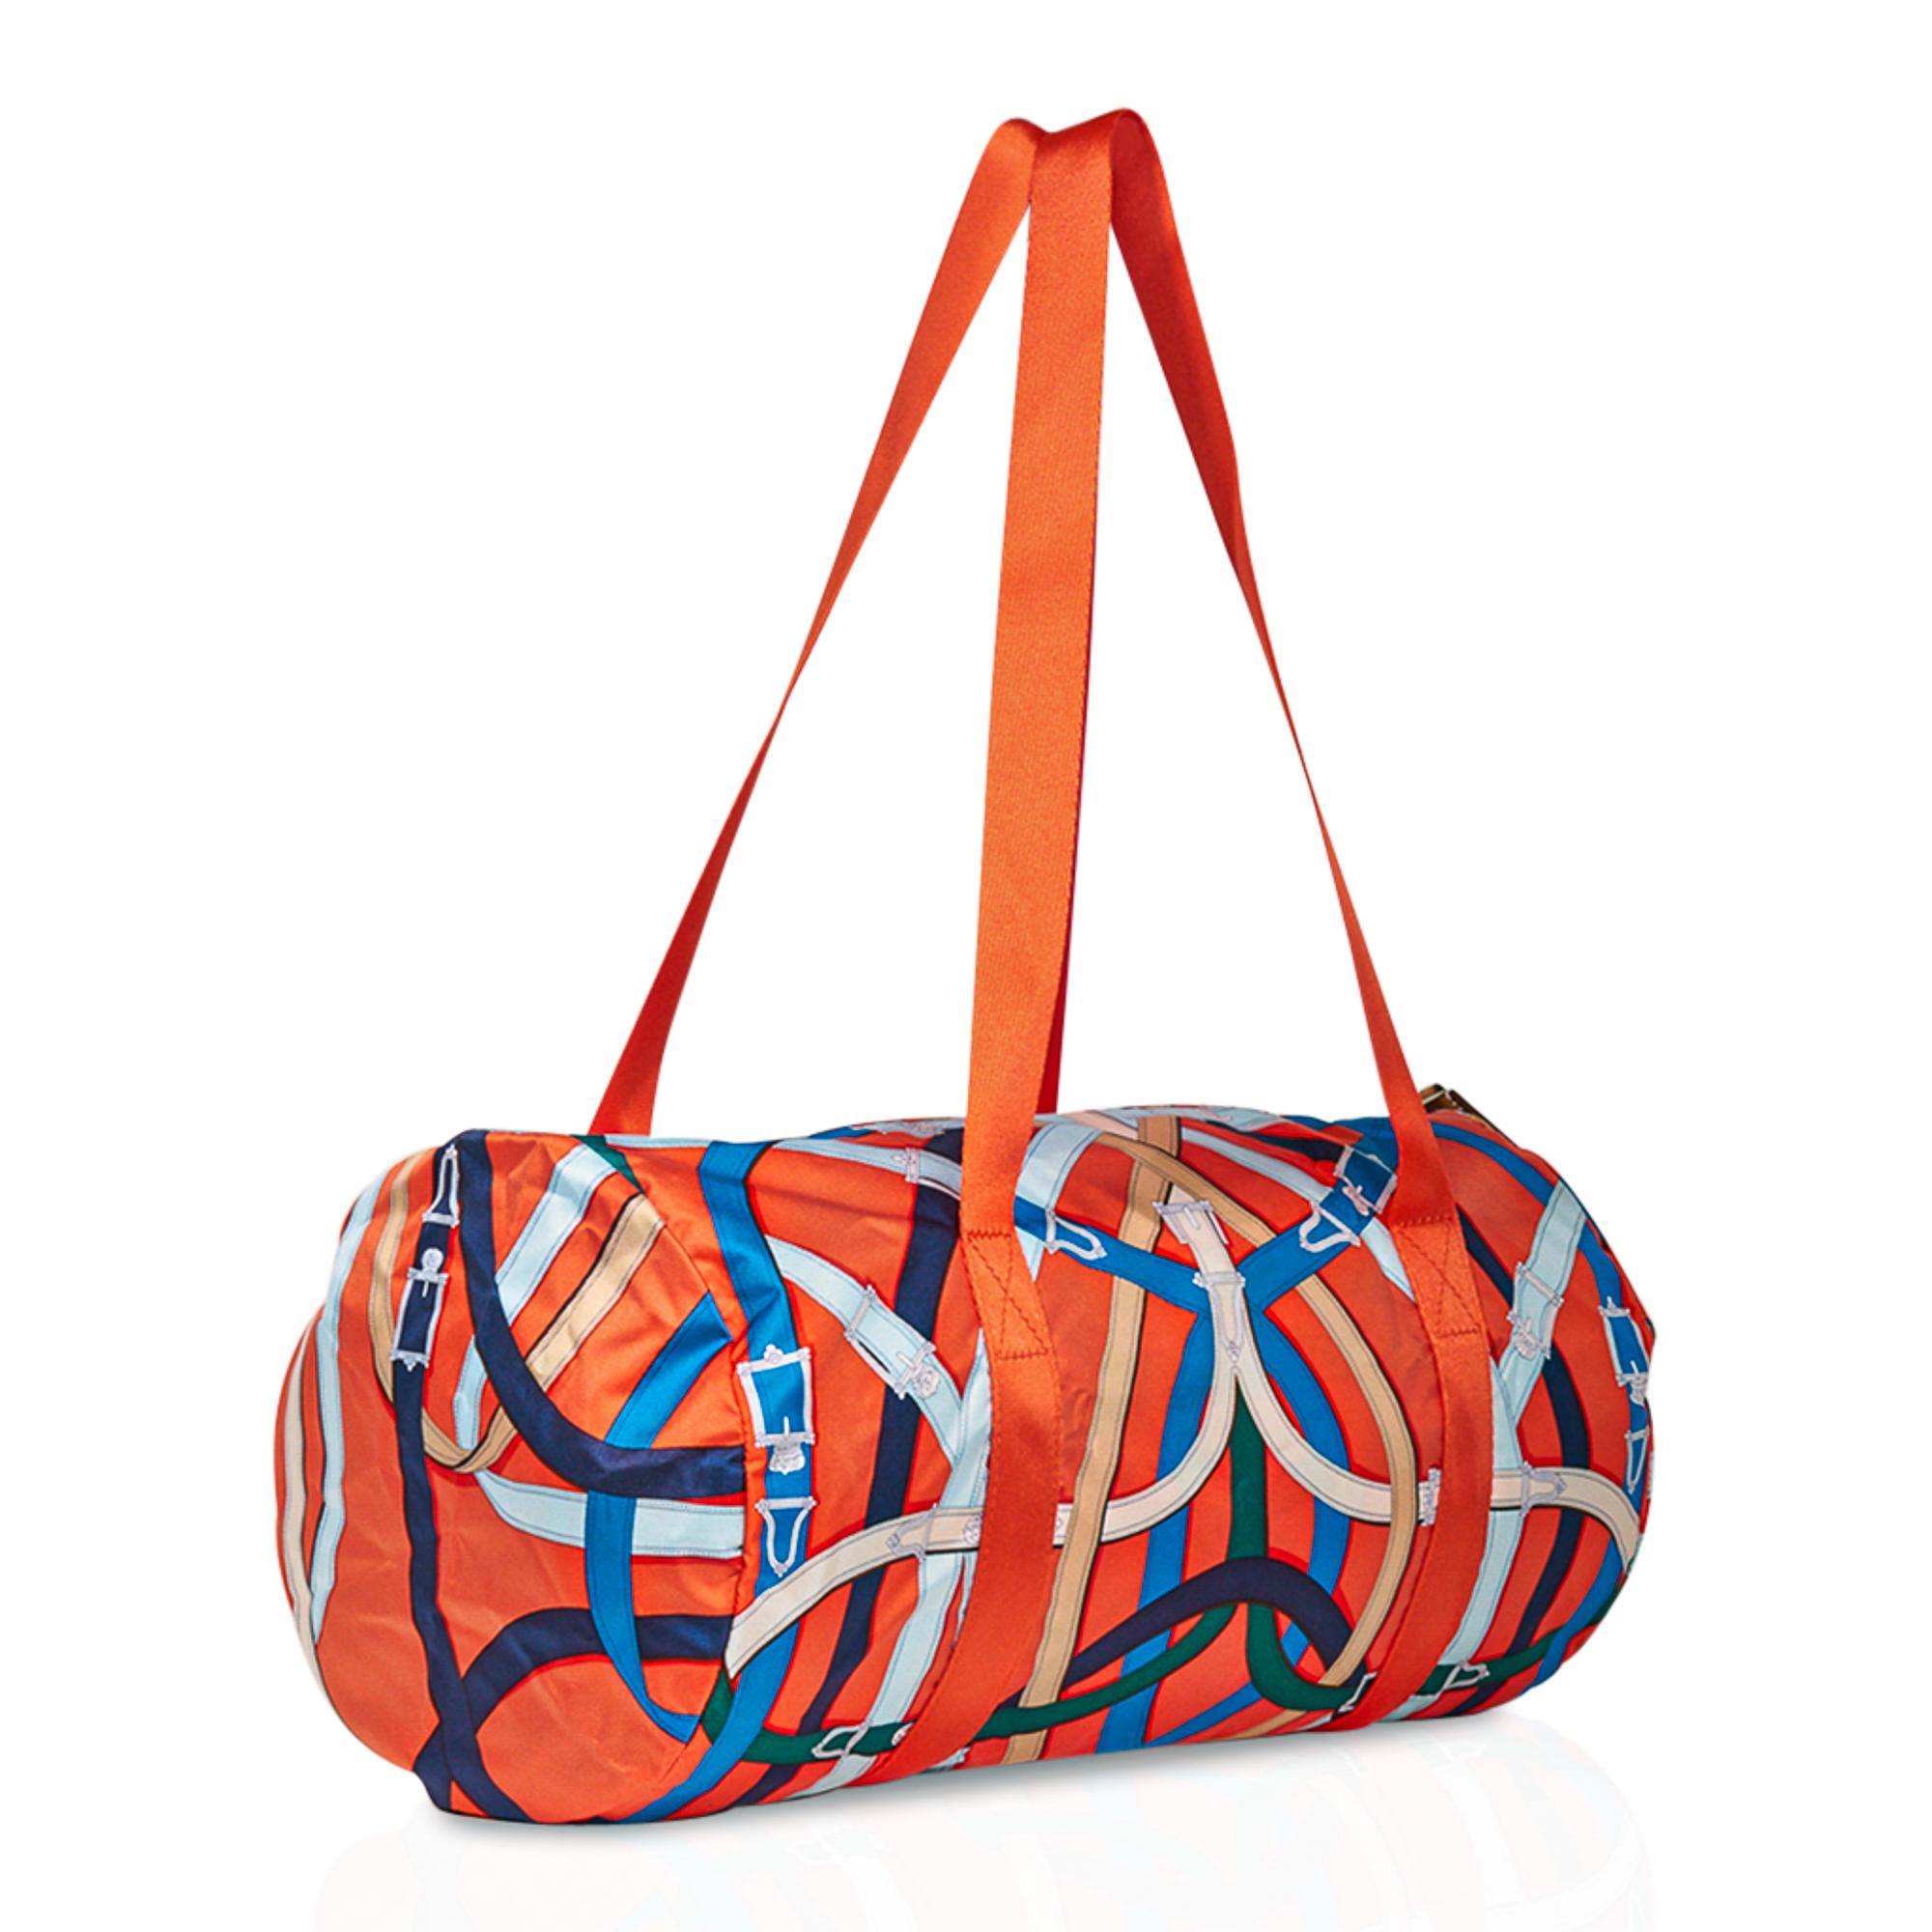 Mightychic offers a limited edition Hermes Airsilk Duffle Cavalcadour 38 featured in Orange Blue, White, Green and Black.
Same size bag is also available in the Blue colourway.
Beautiful Cavalcadour silk scarf print designed by Henri d'Origny.
The